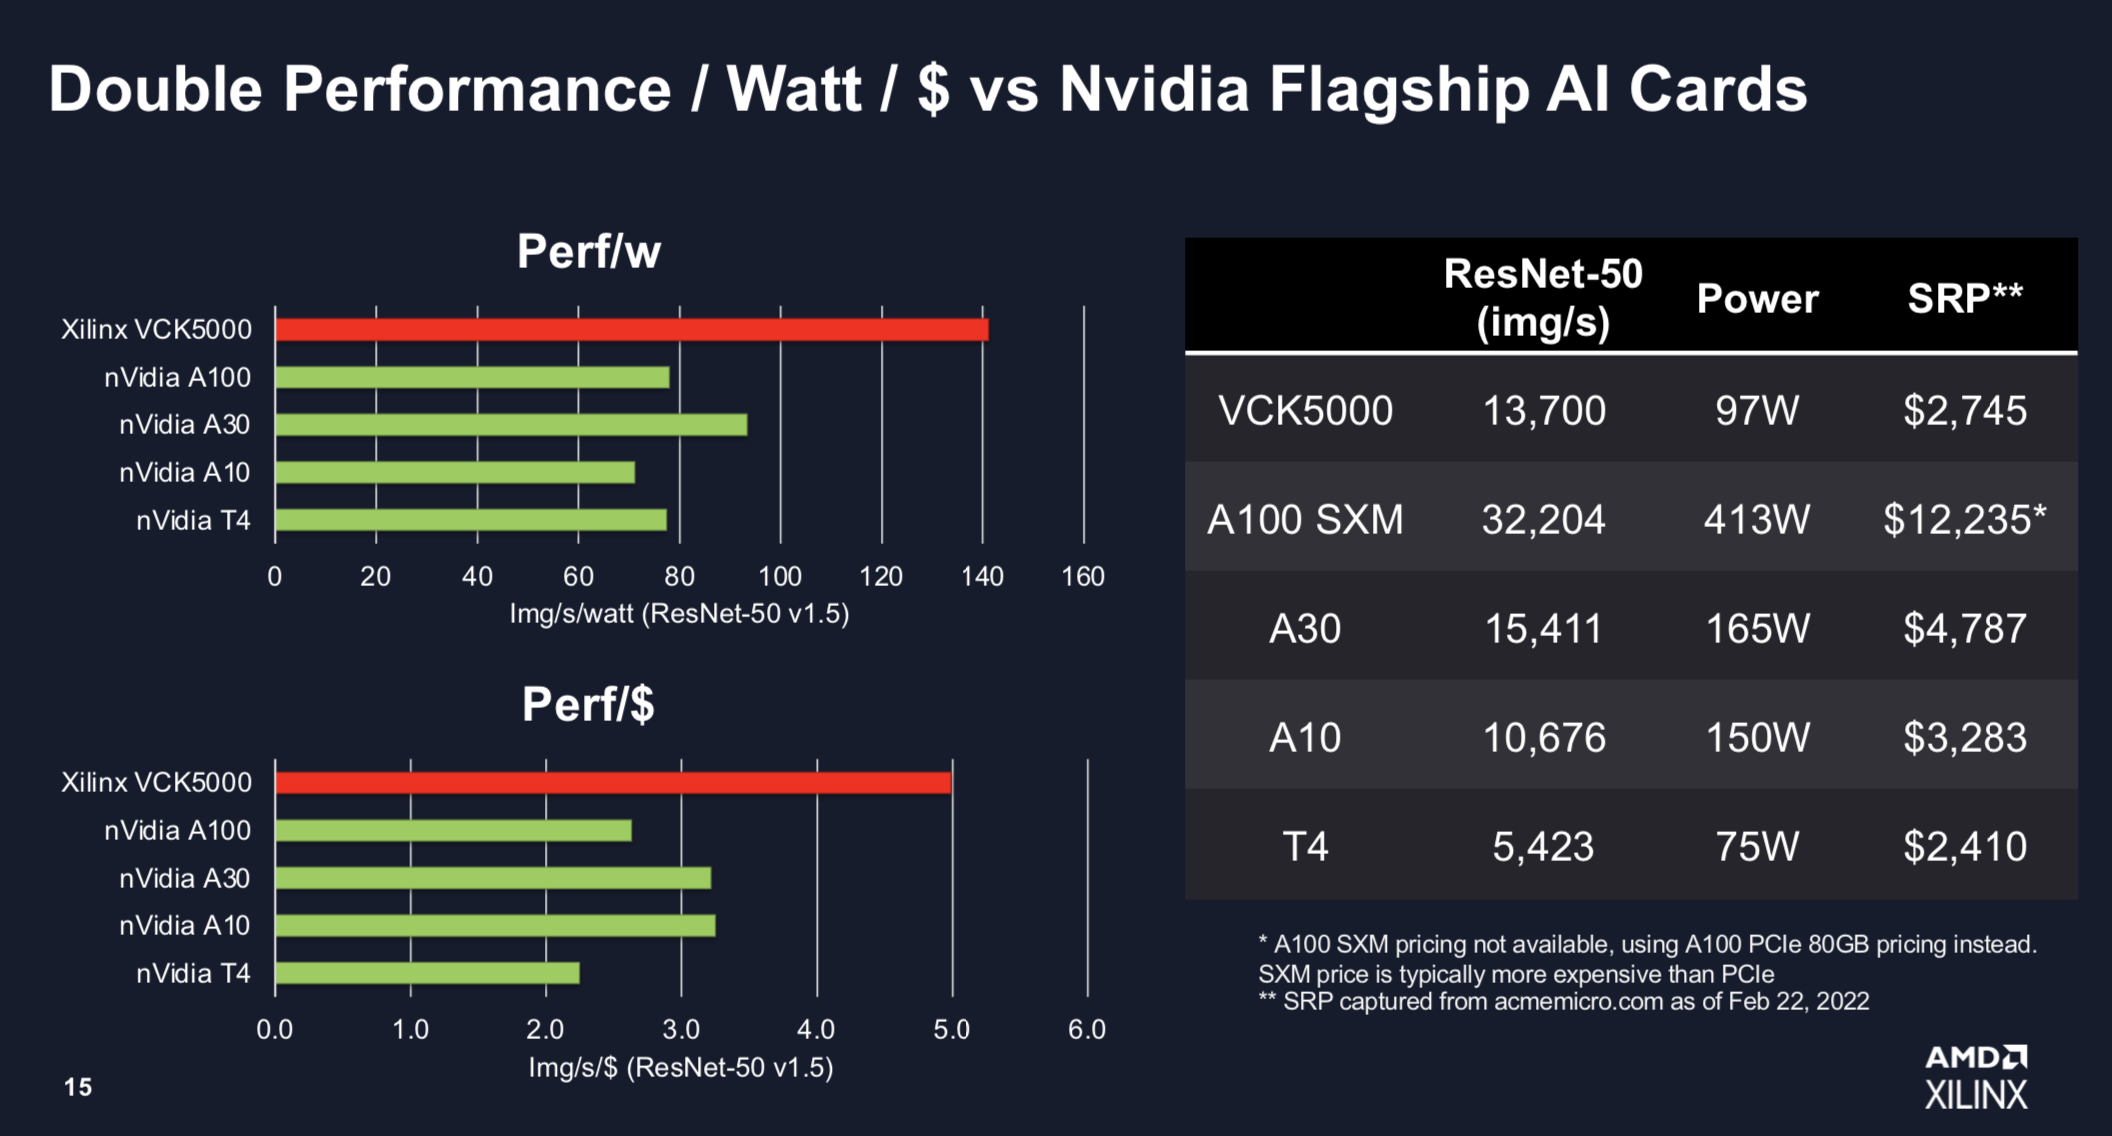 Nvidia sweeps AI benchmarks, but Intel brings meaningful competition